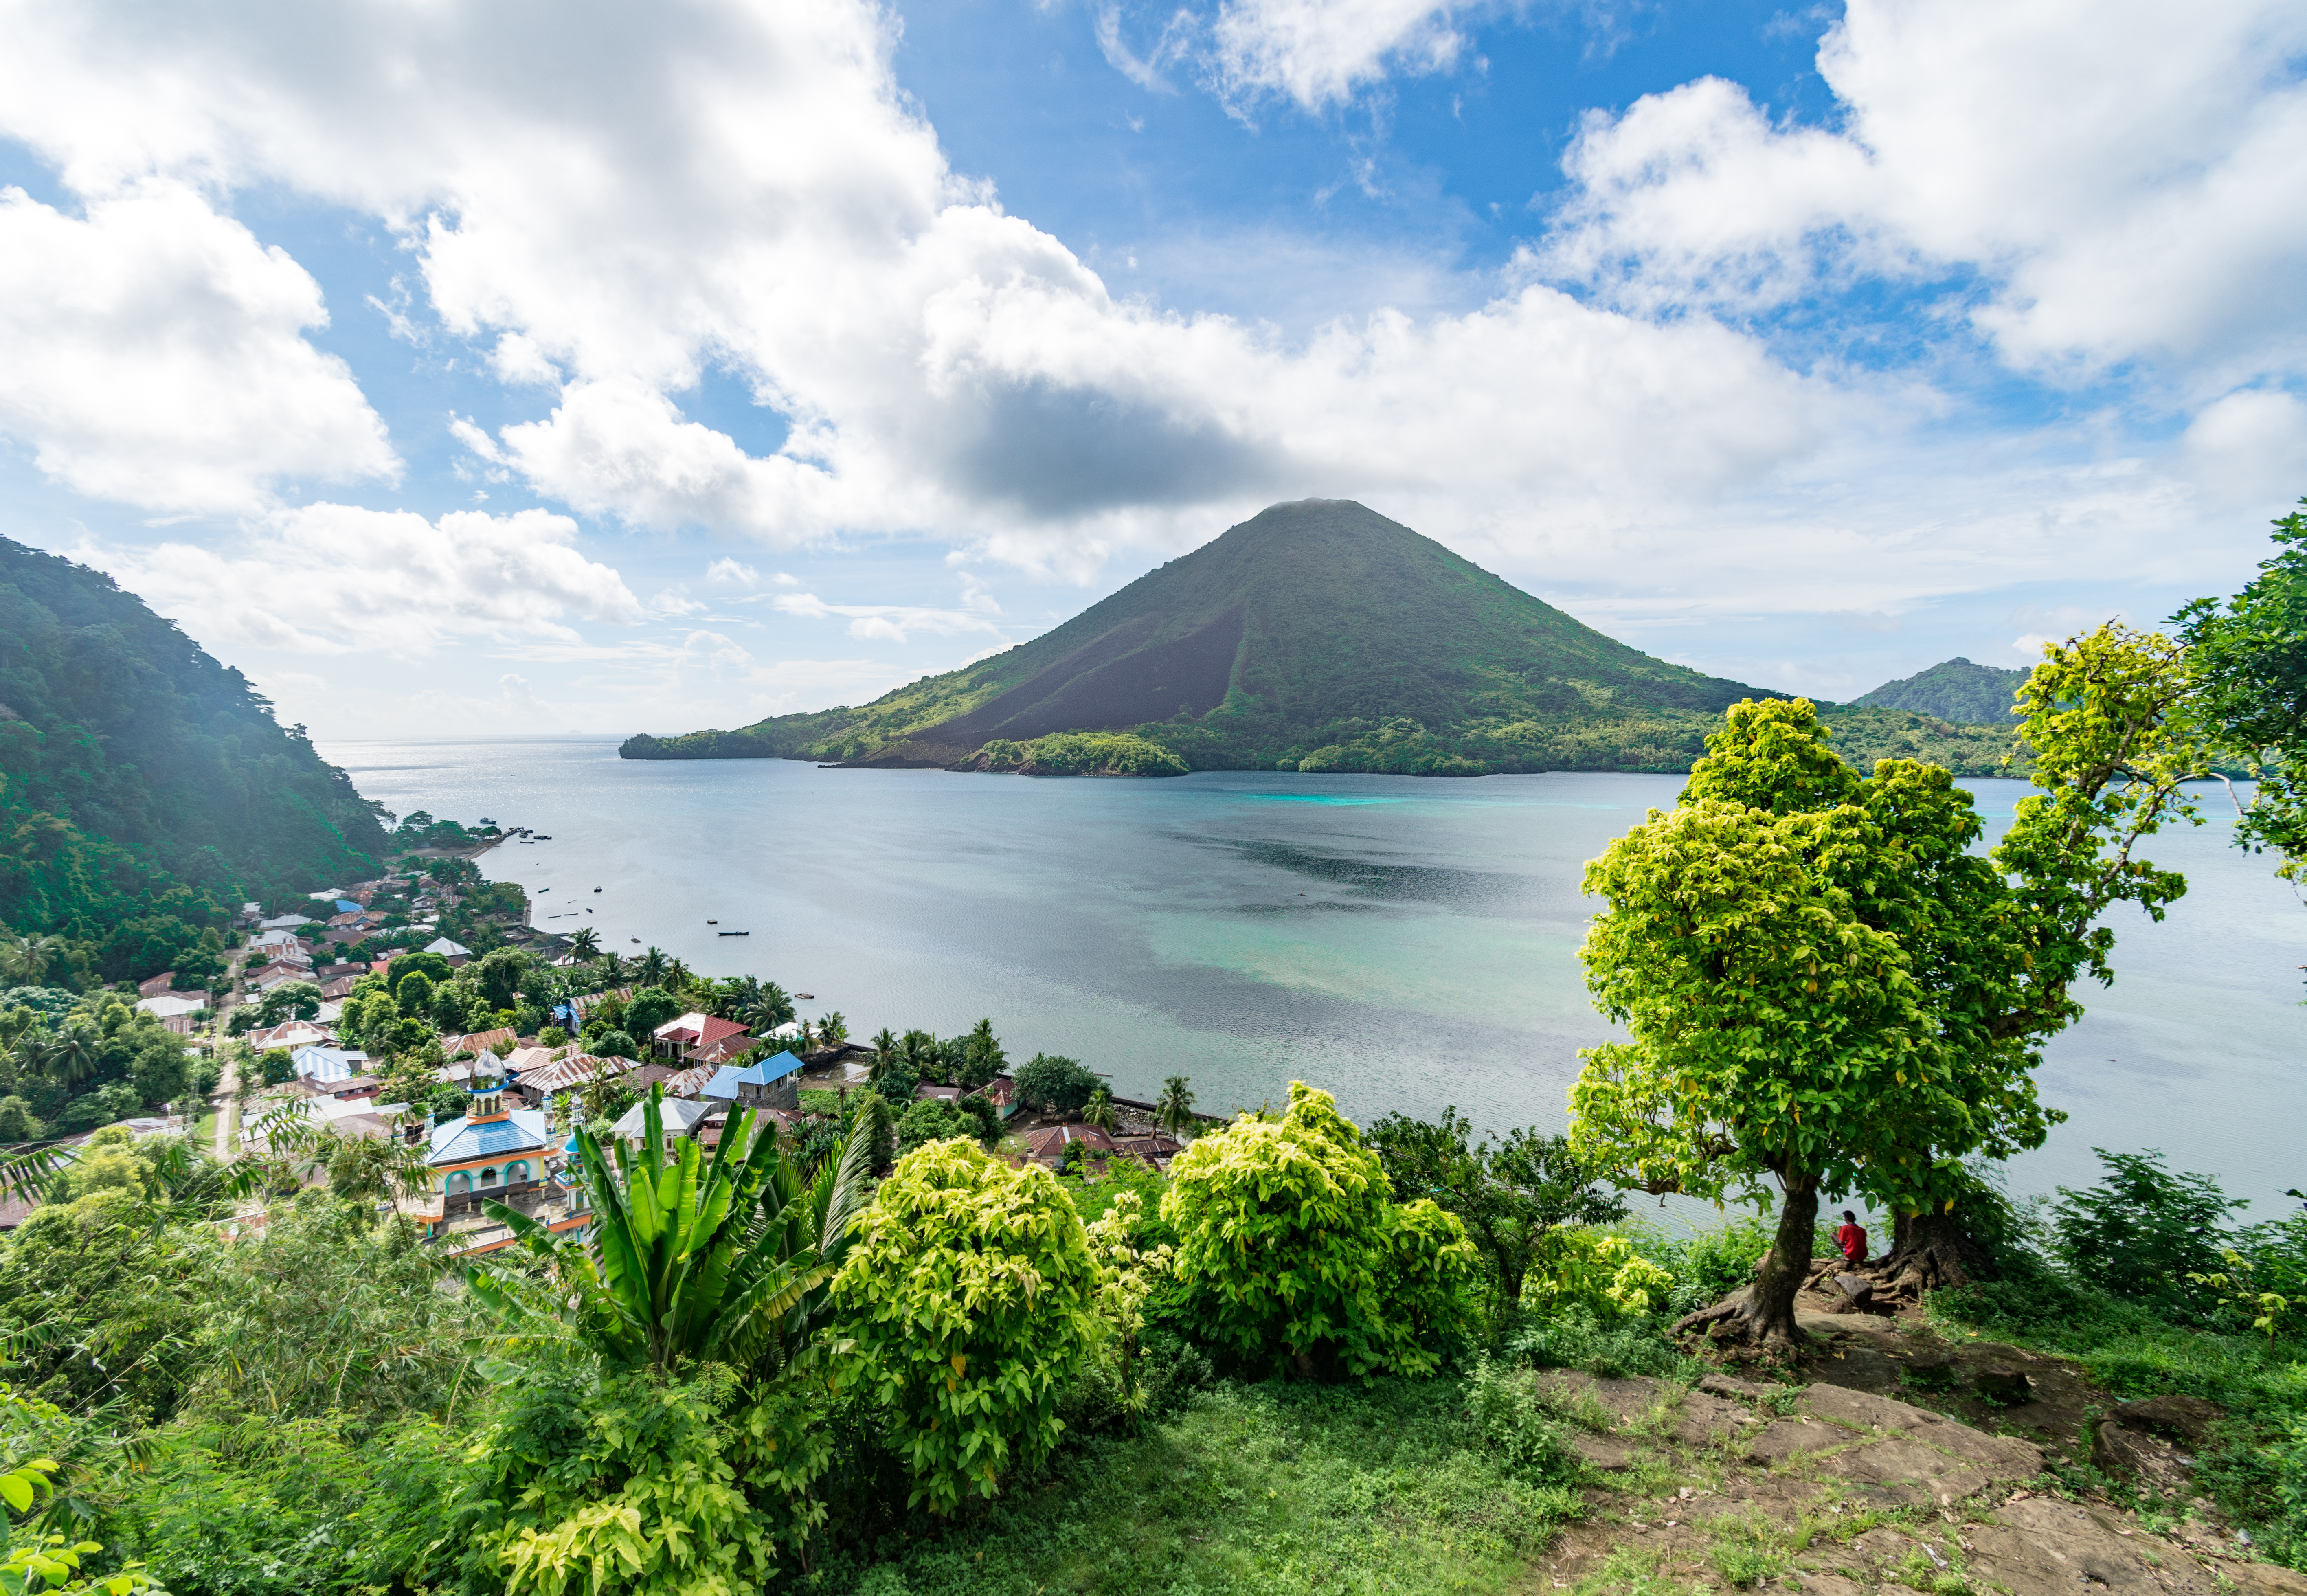 How to get to Banda Islands